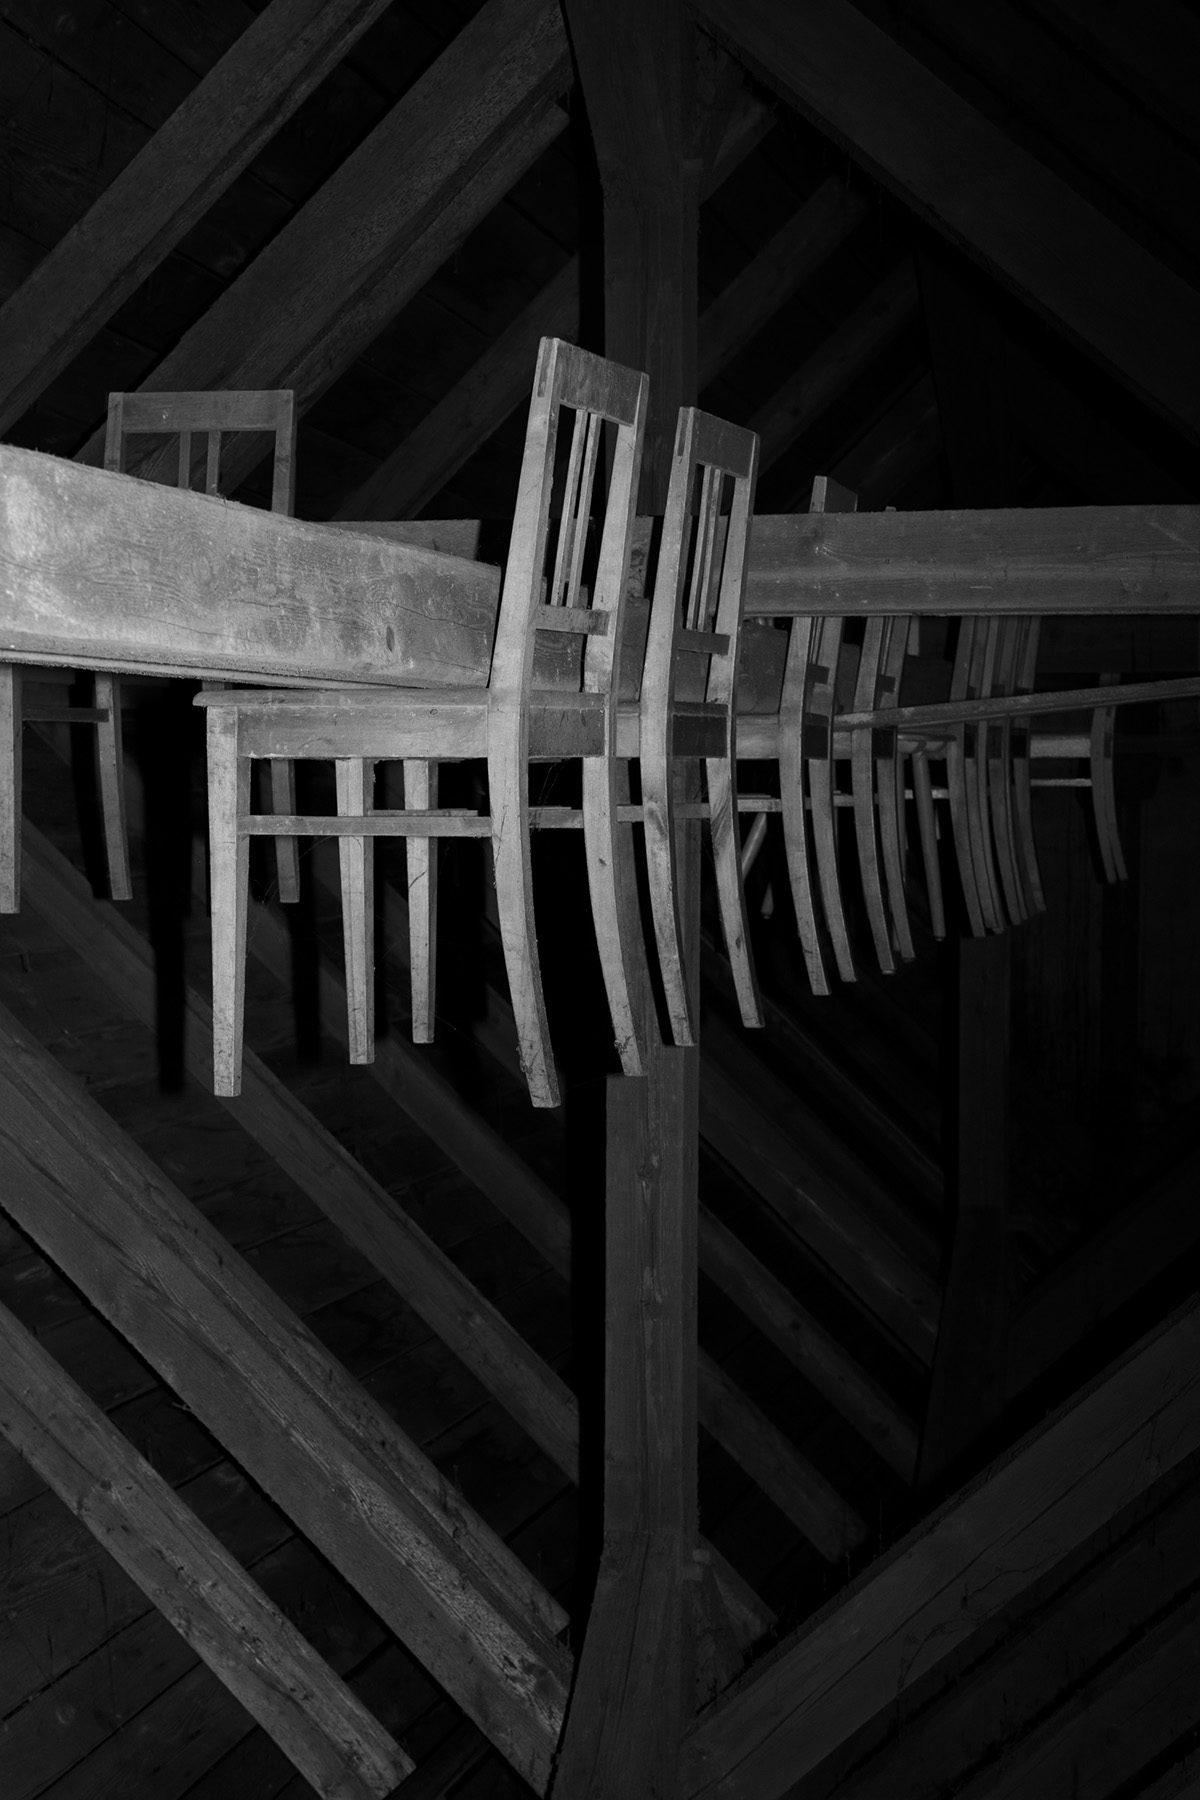 Black and white photograph from Plexus by Elena Helfrecht showing rows of chairs attached to wooden beams which appear to float in the air